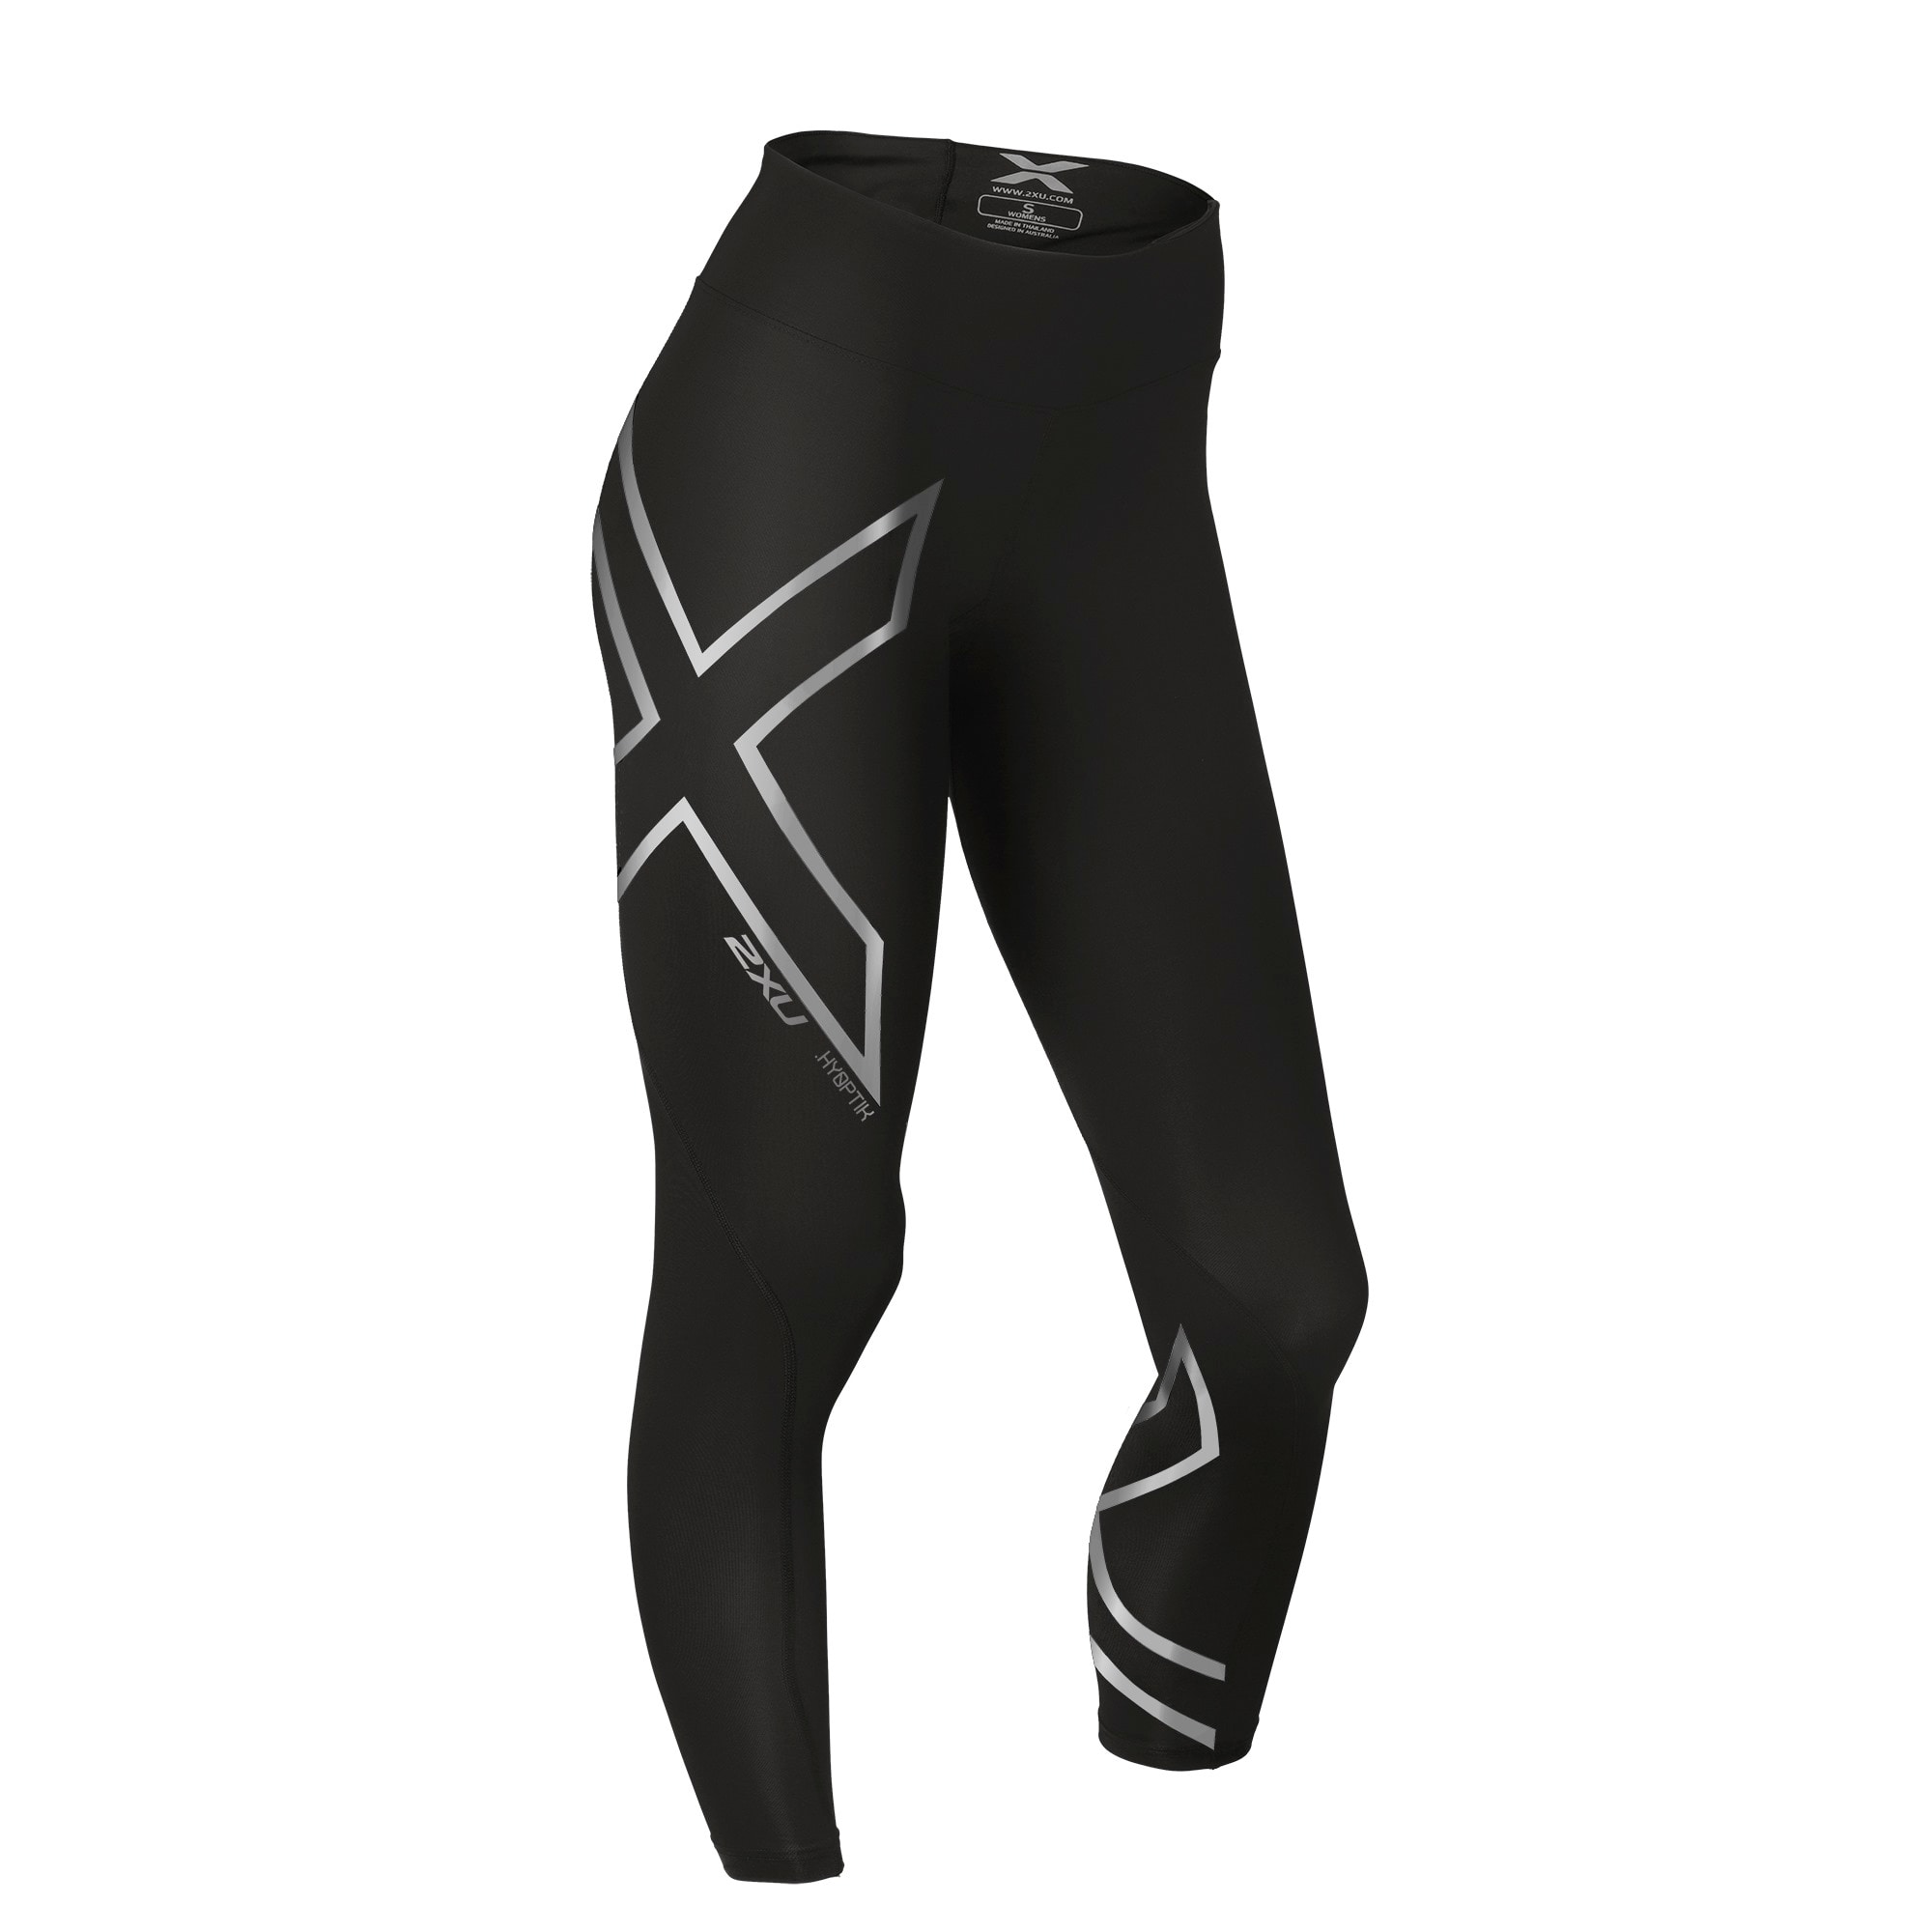 Women's Hyoptik Mid-Rise Compression Tights from Outnorth